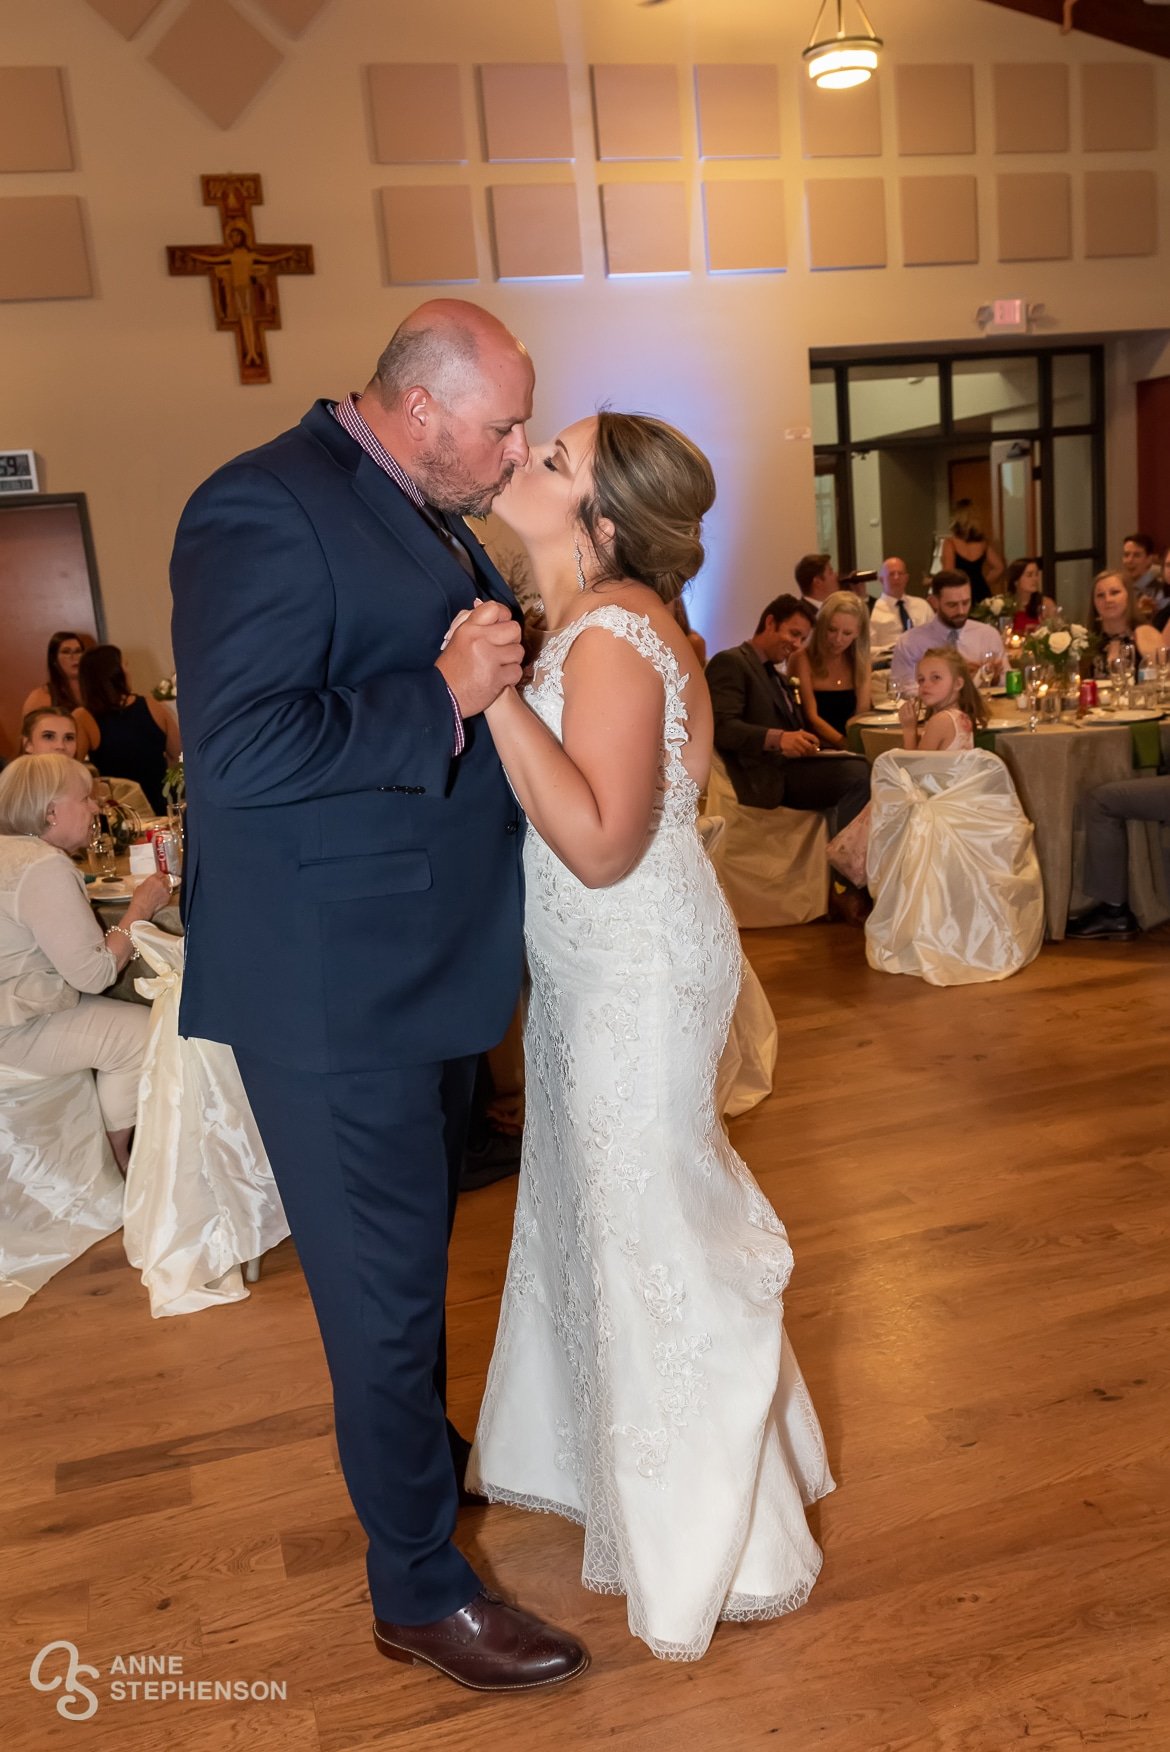 A bride and groom kiss at the end of their first dance celebration.